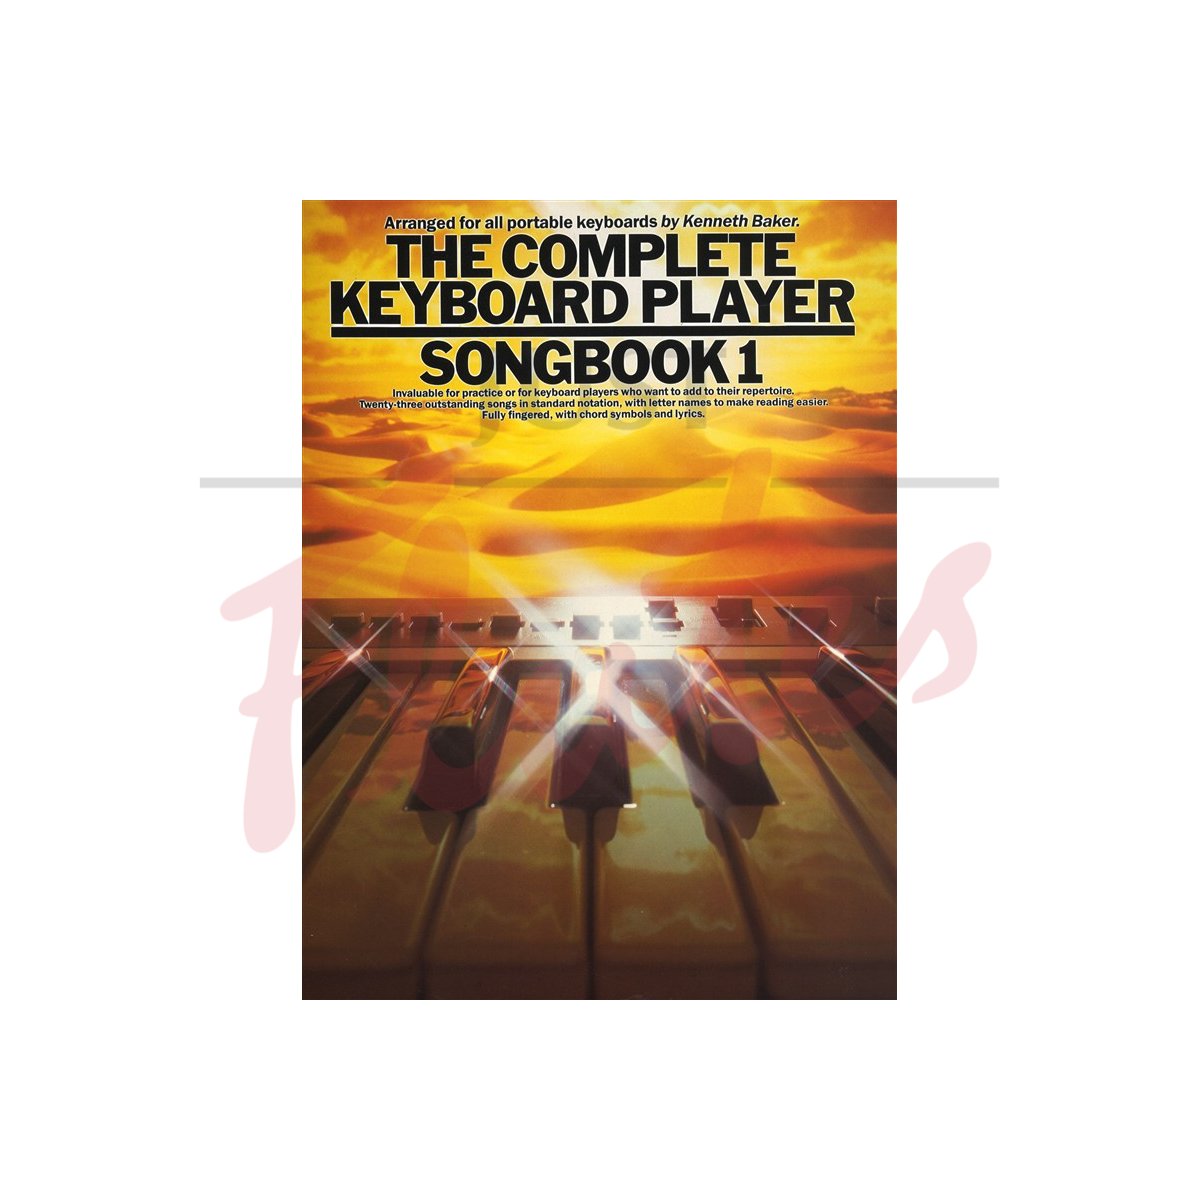 The Complete Keyboard Player Songbook 1